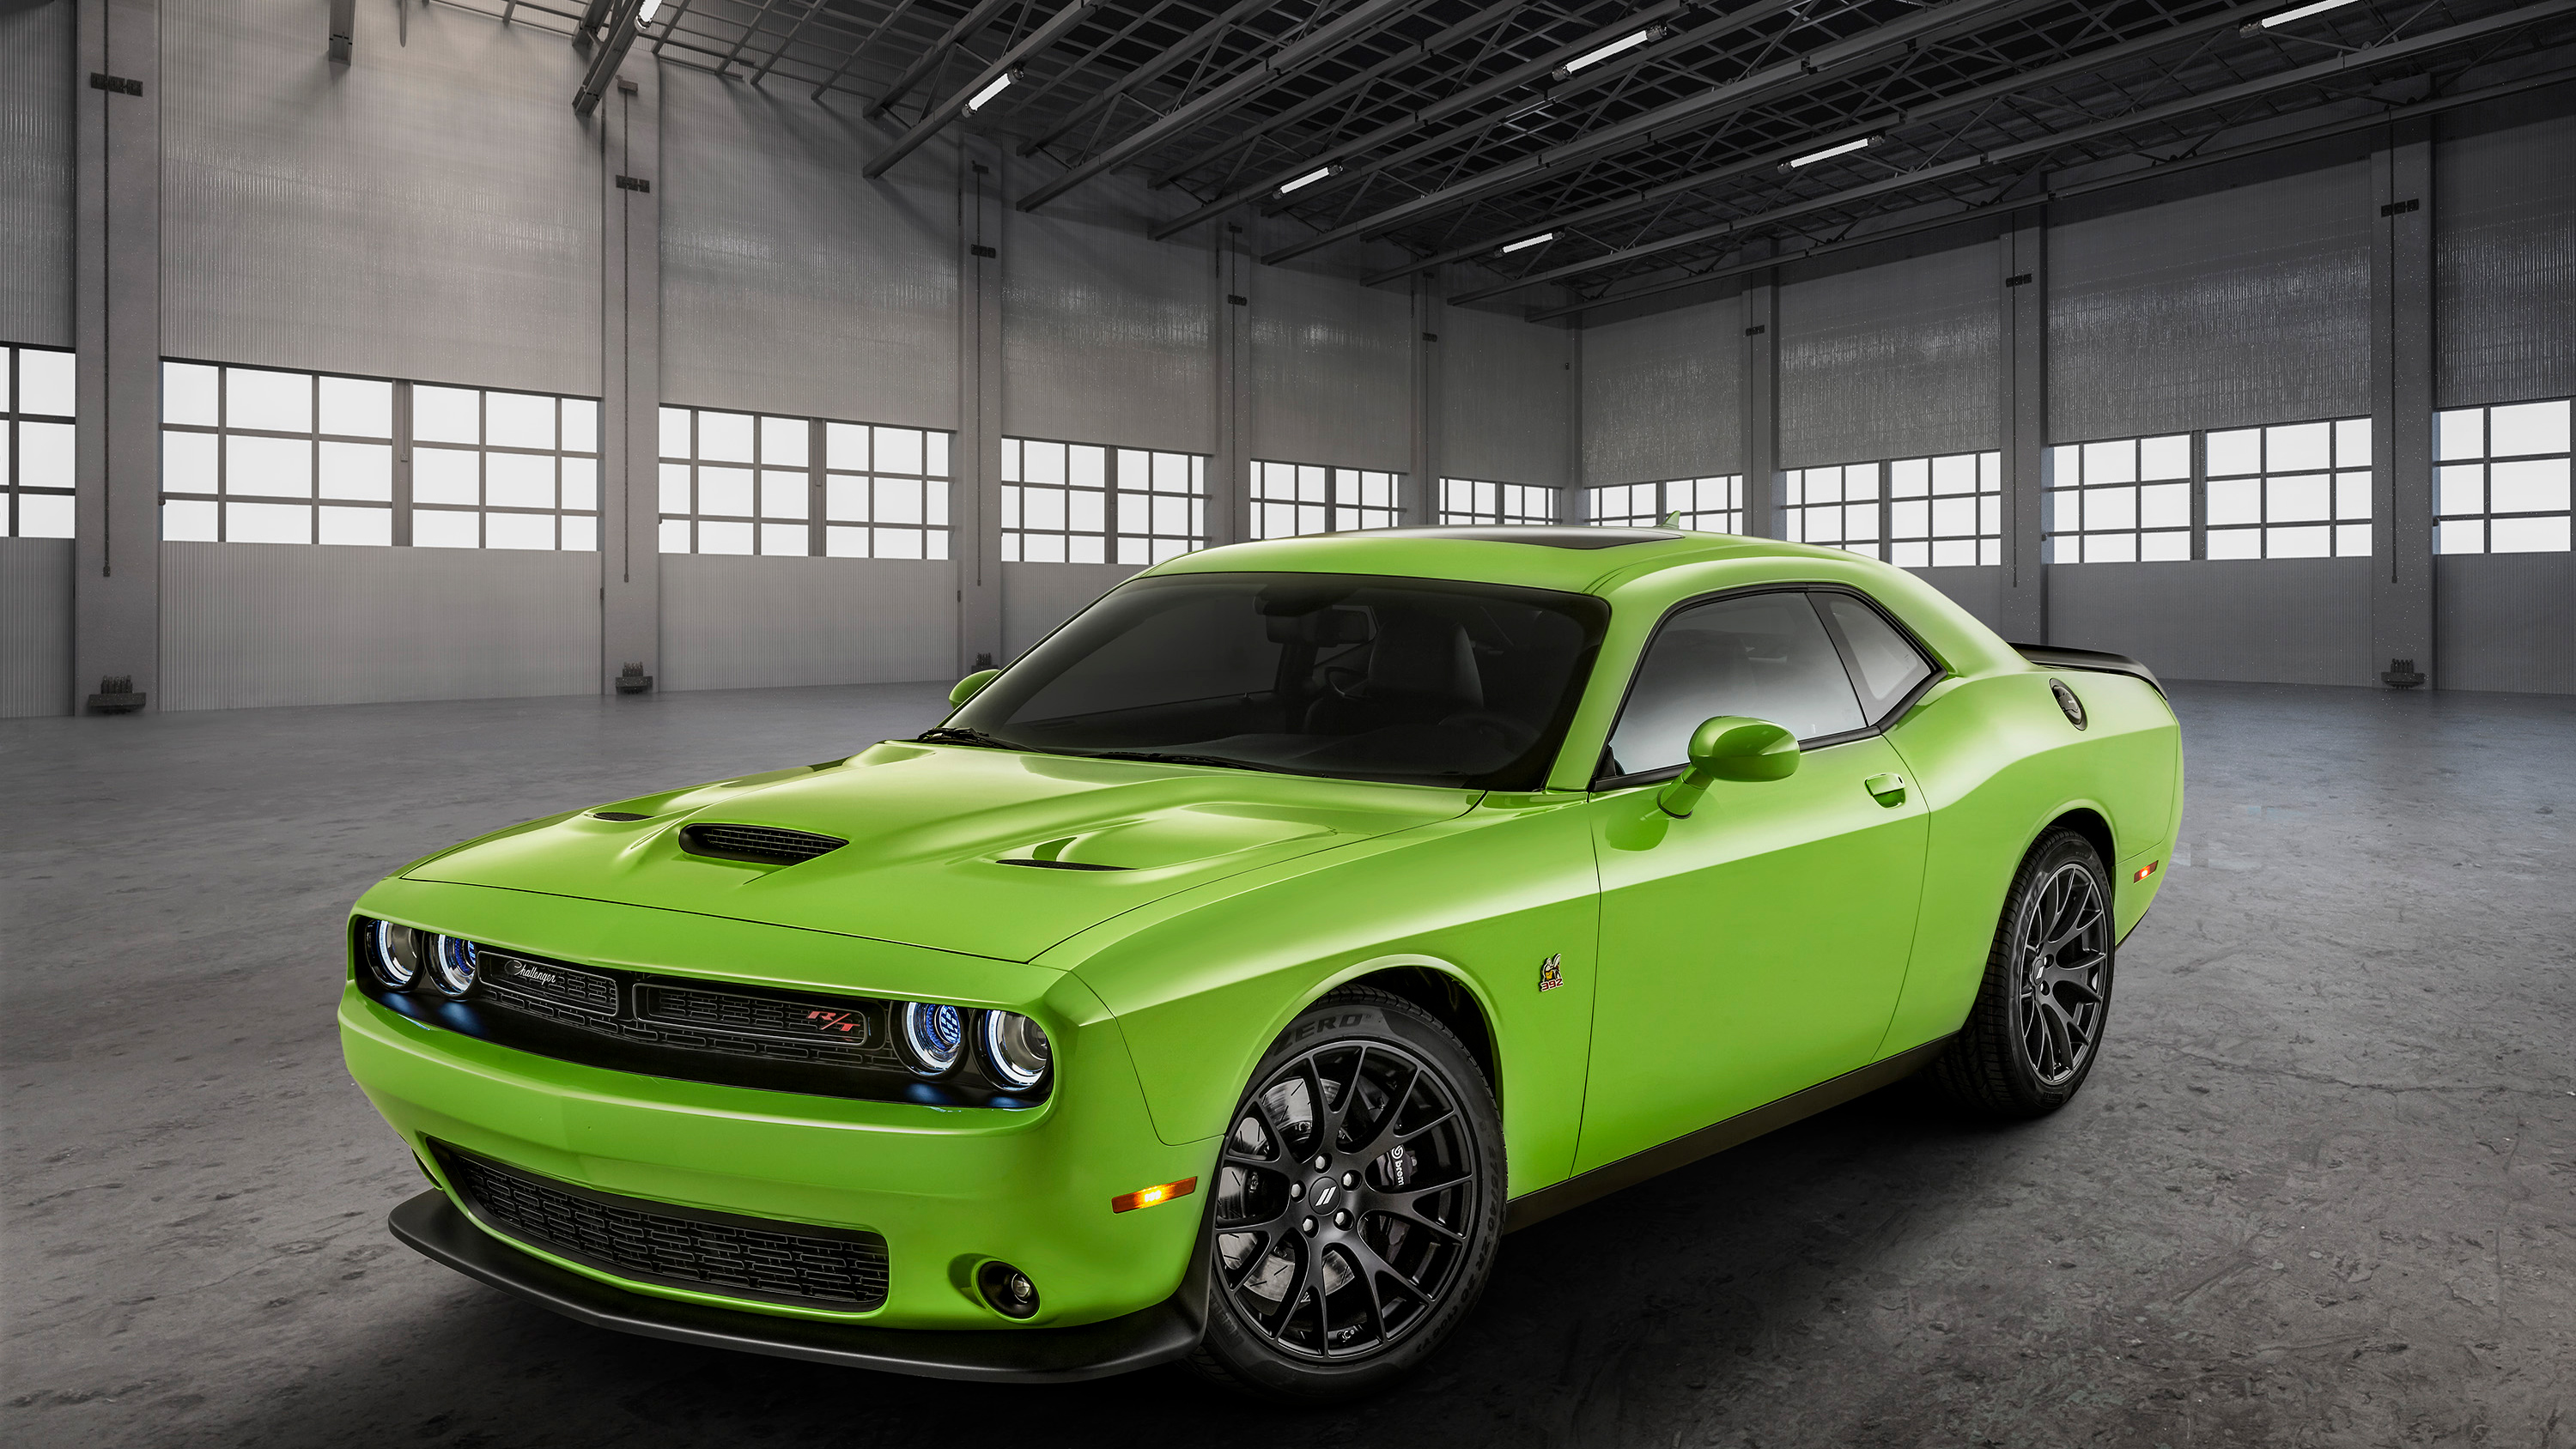 The Dodge Charger is a lettuce-colored